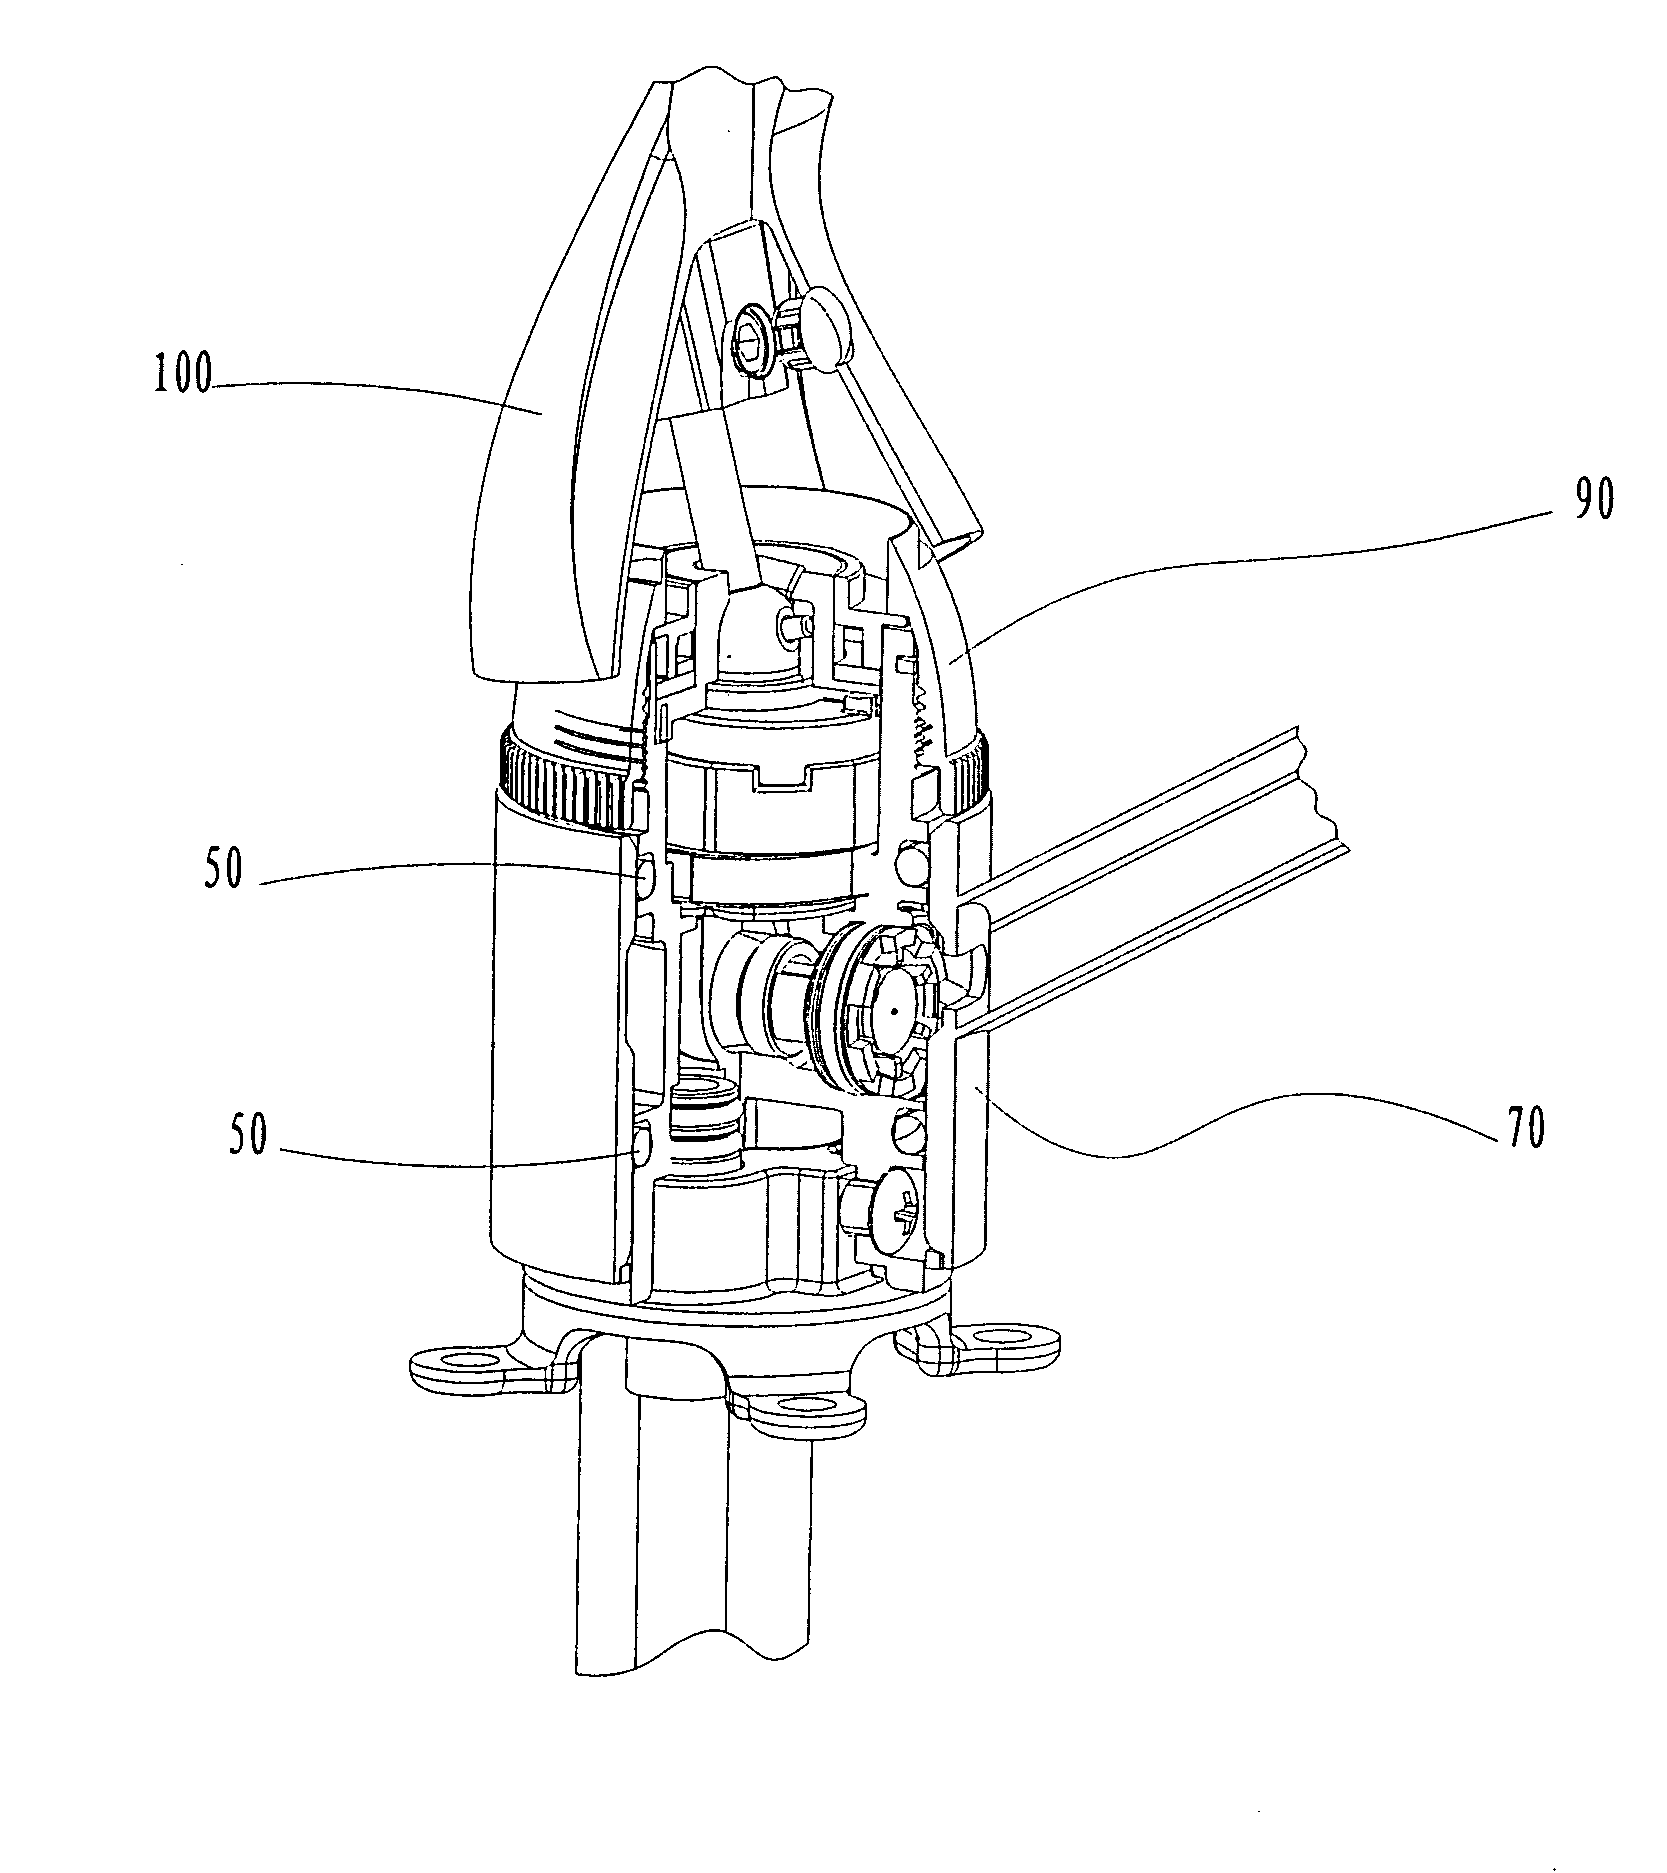 Internal assembly for a faucet